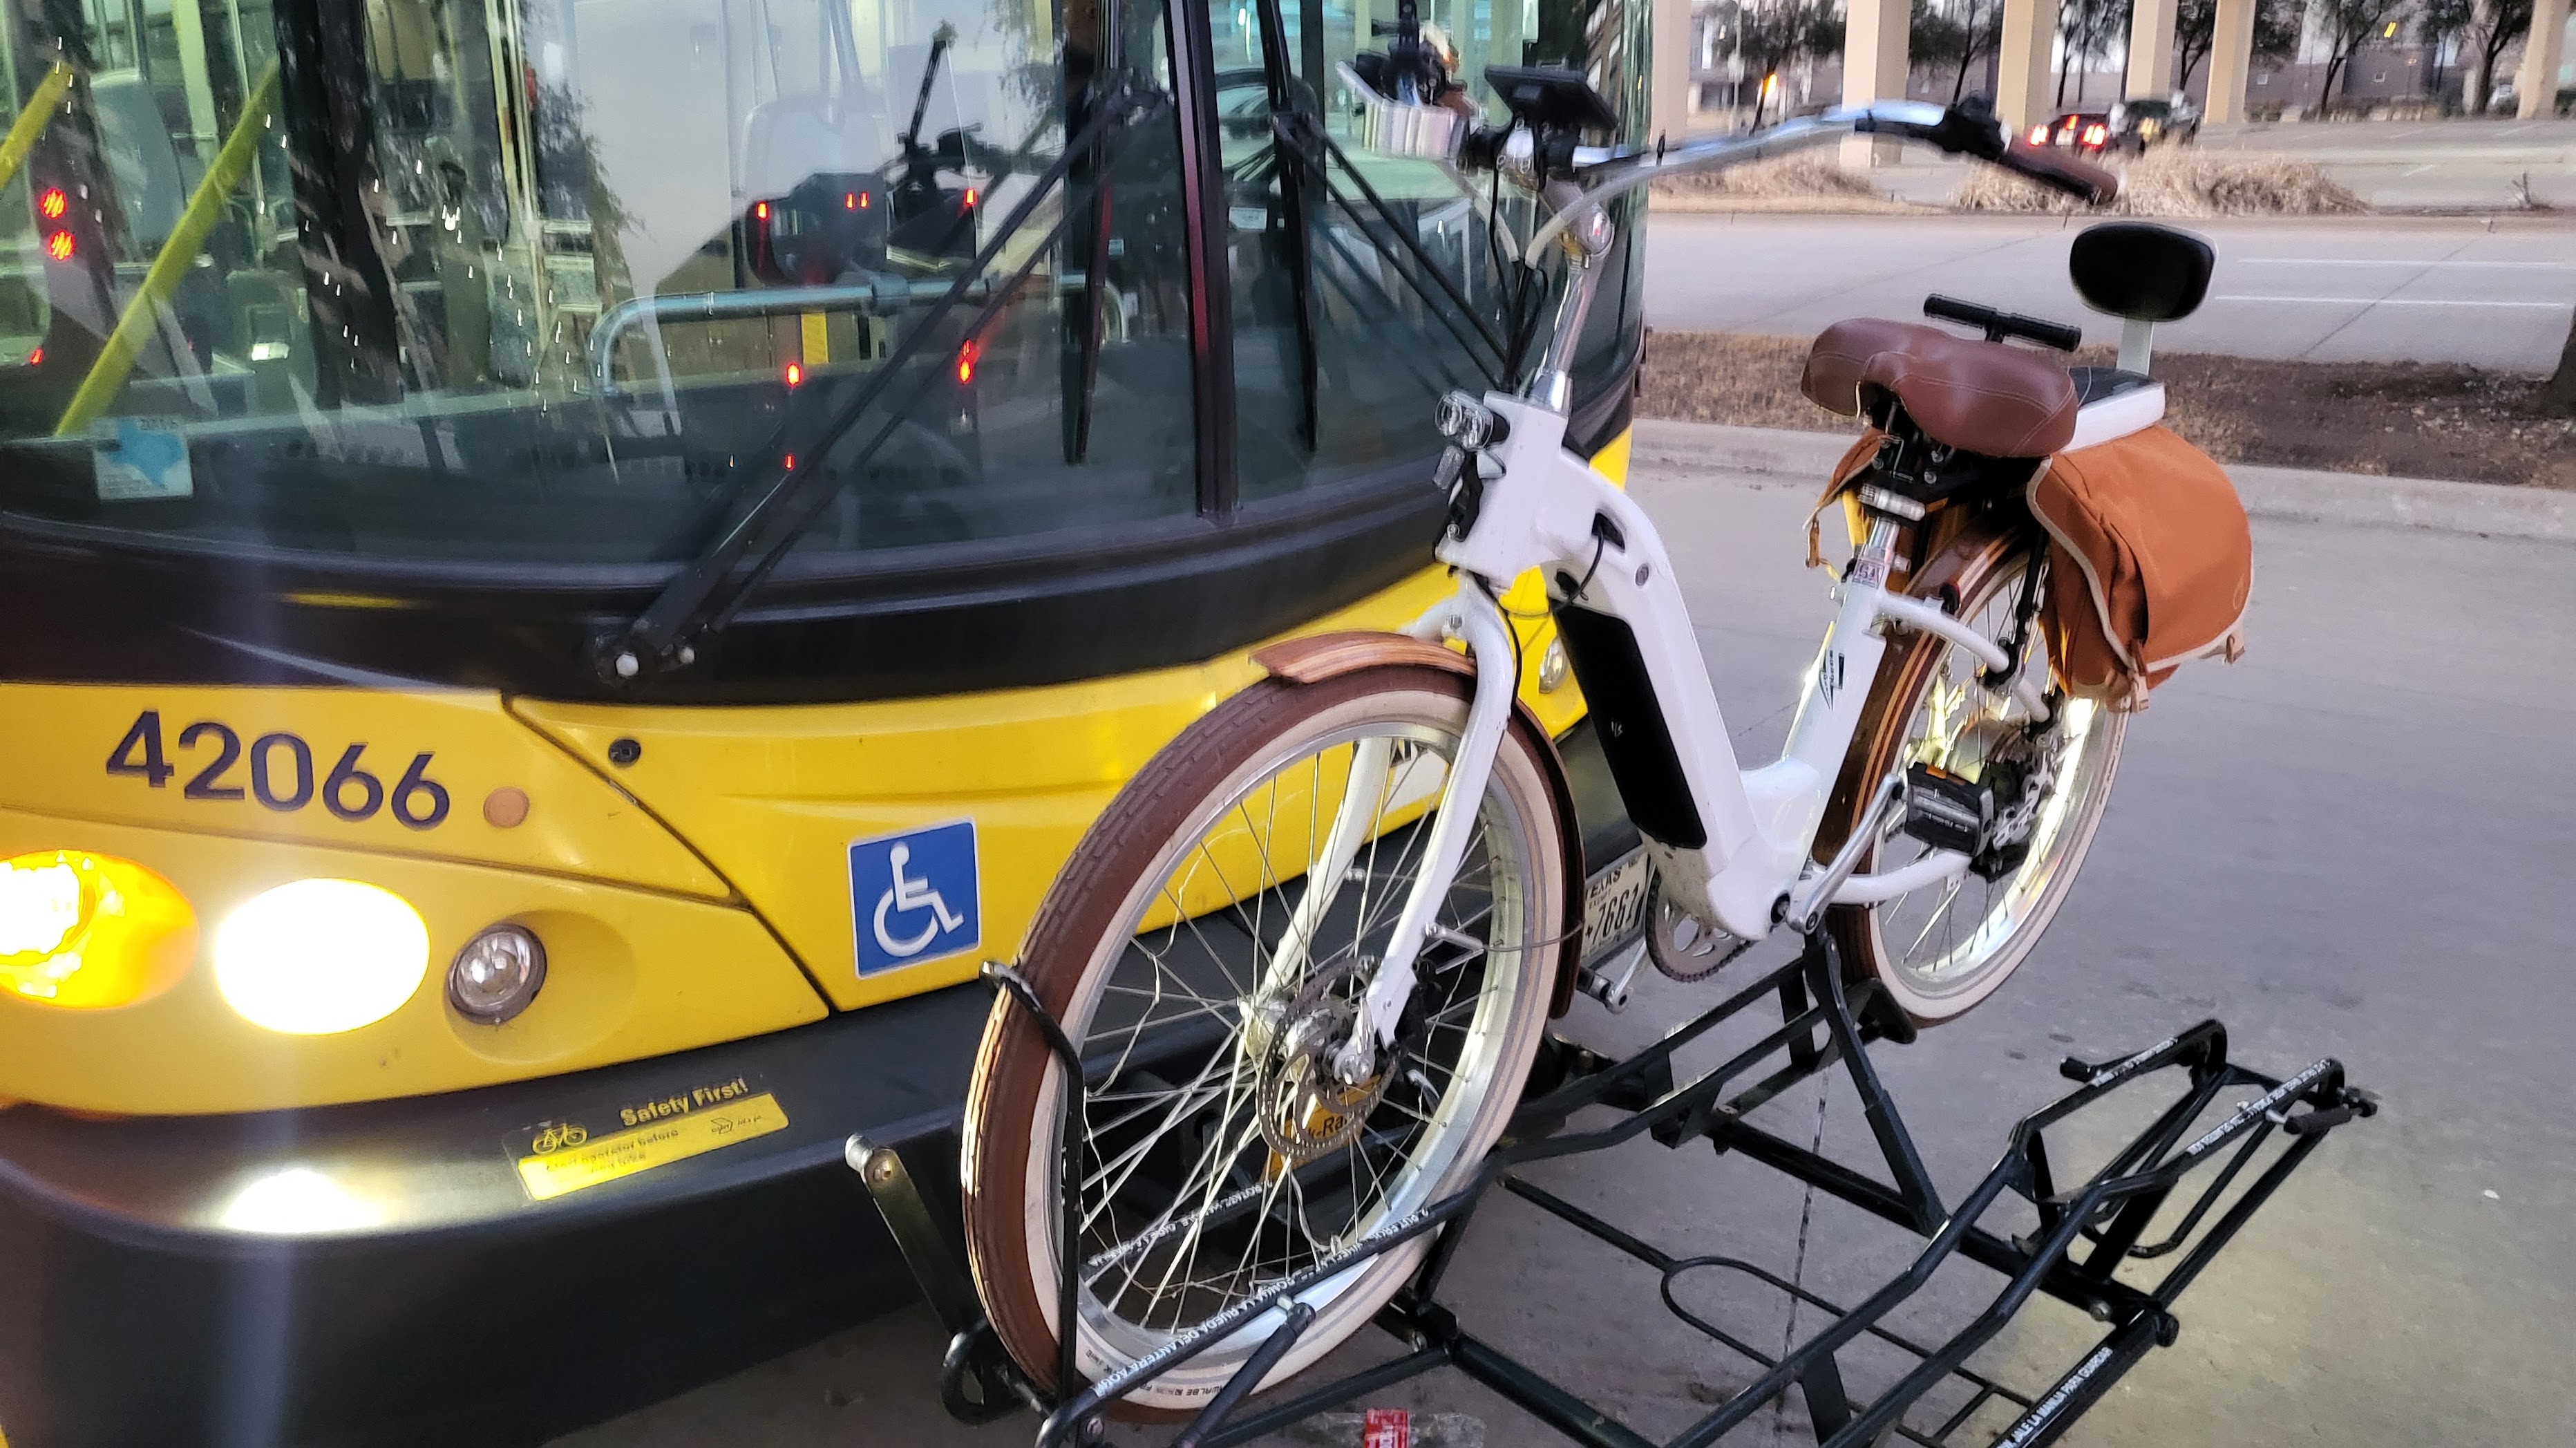 Electric bicycle mounted on the front-rack of a public bus.